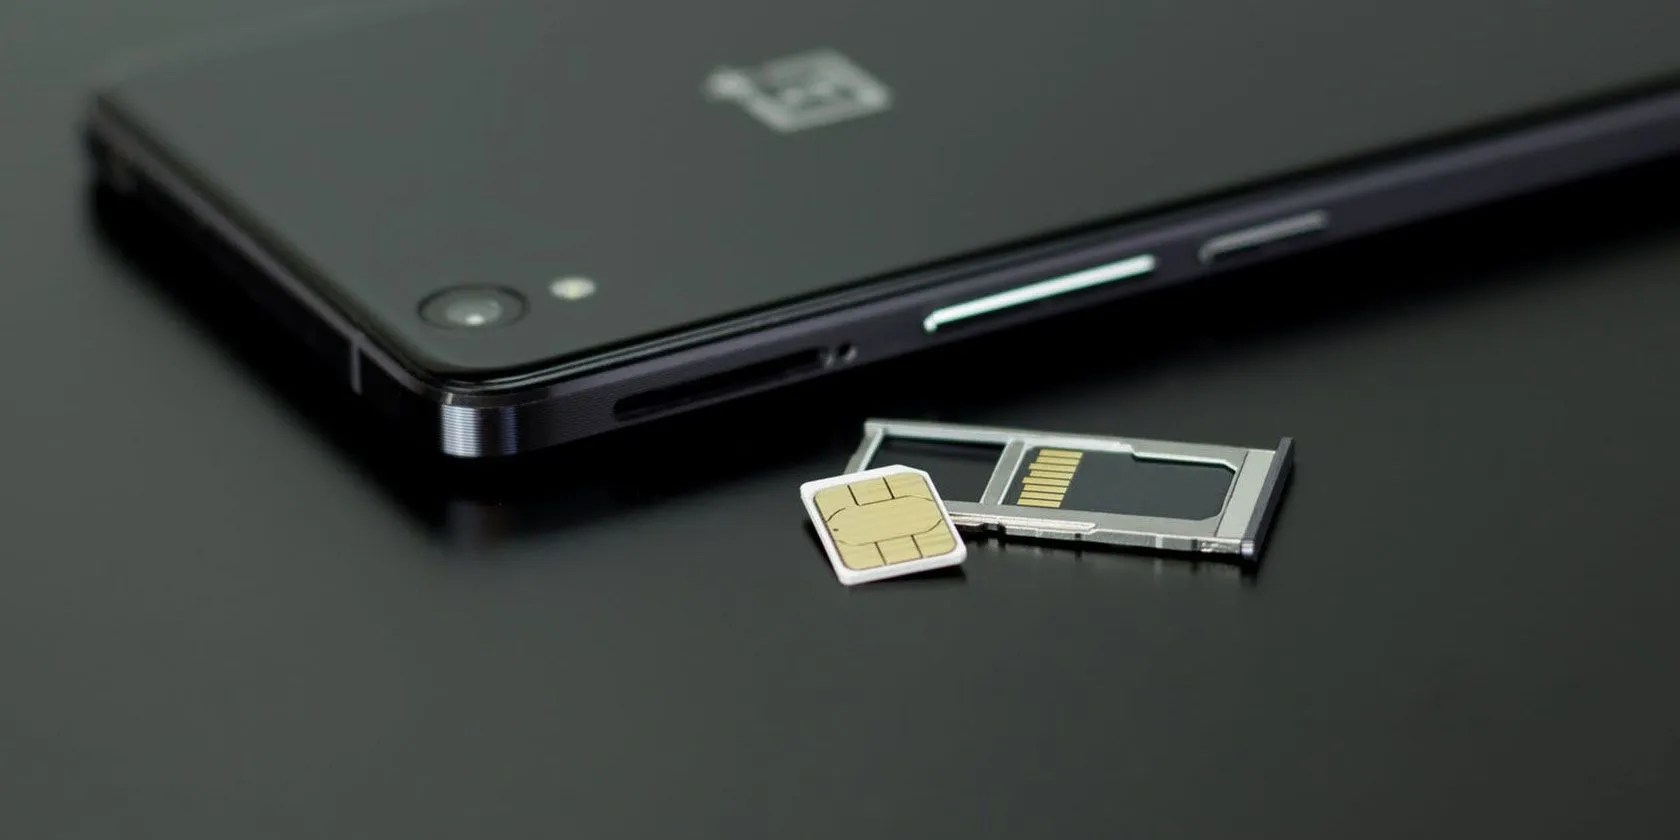 How to Reset My SIM Card Settings?